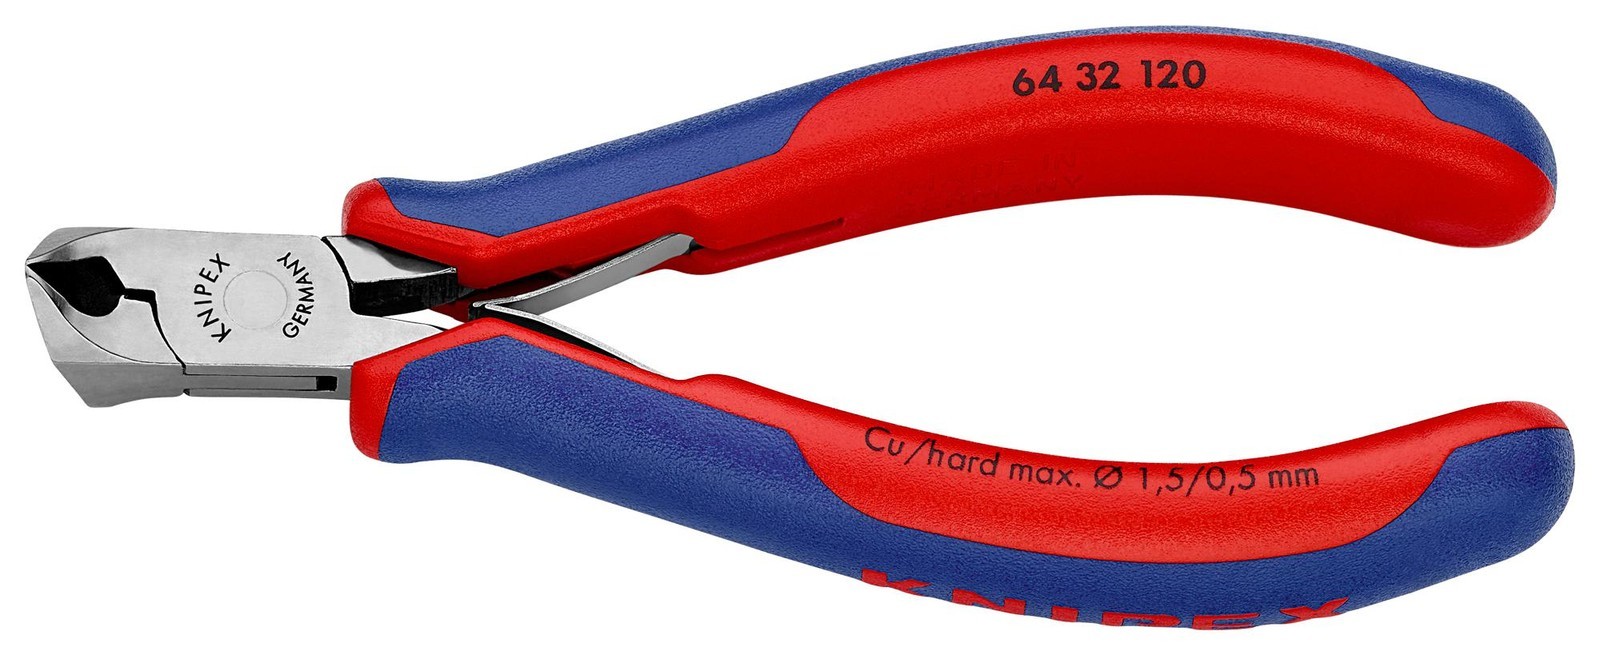 Knipex 64 32 120 Cutter, Oblique, 120mm